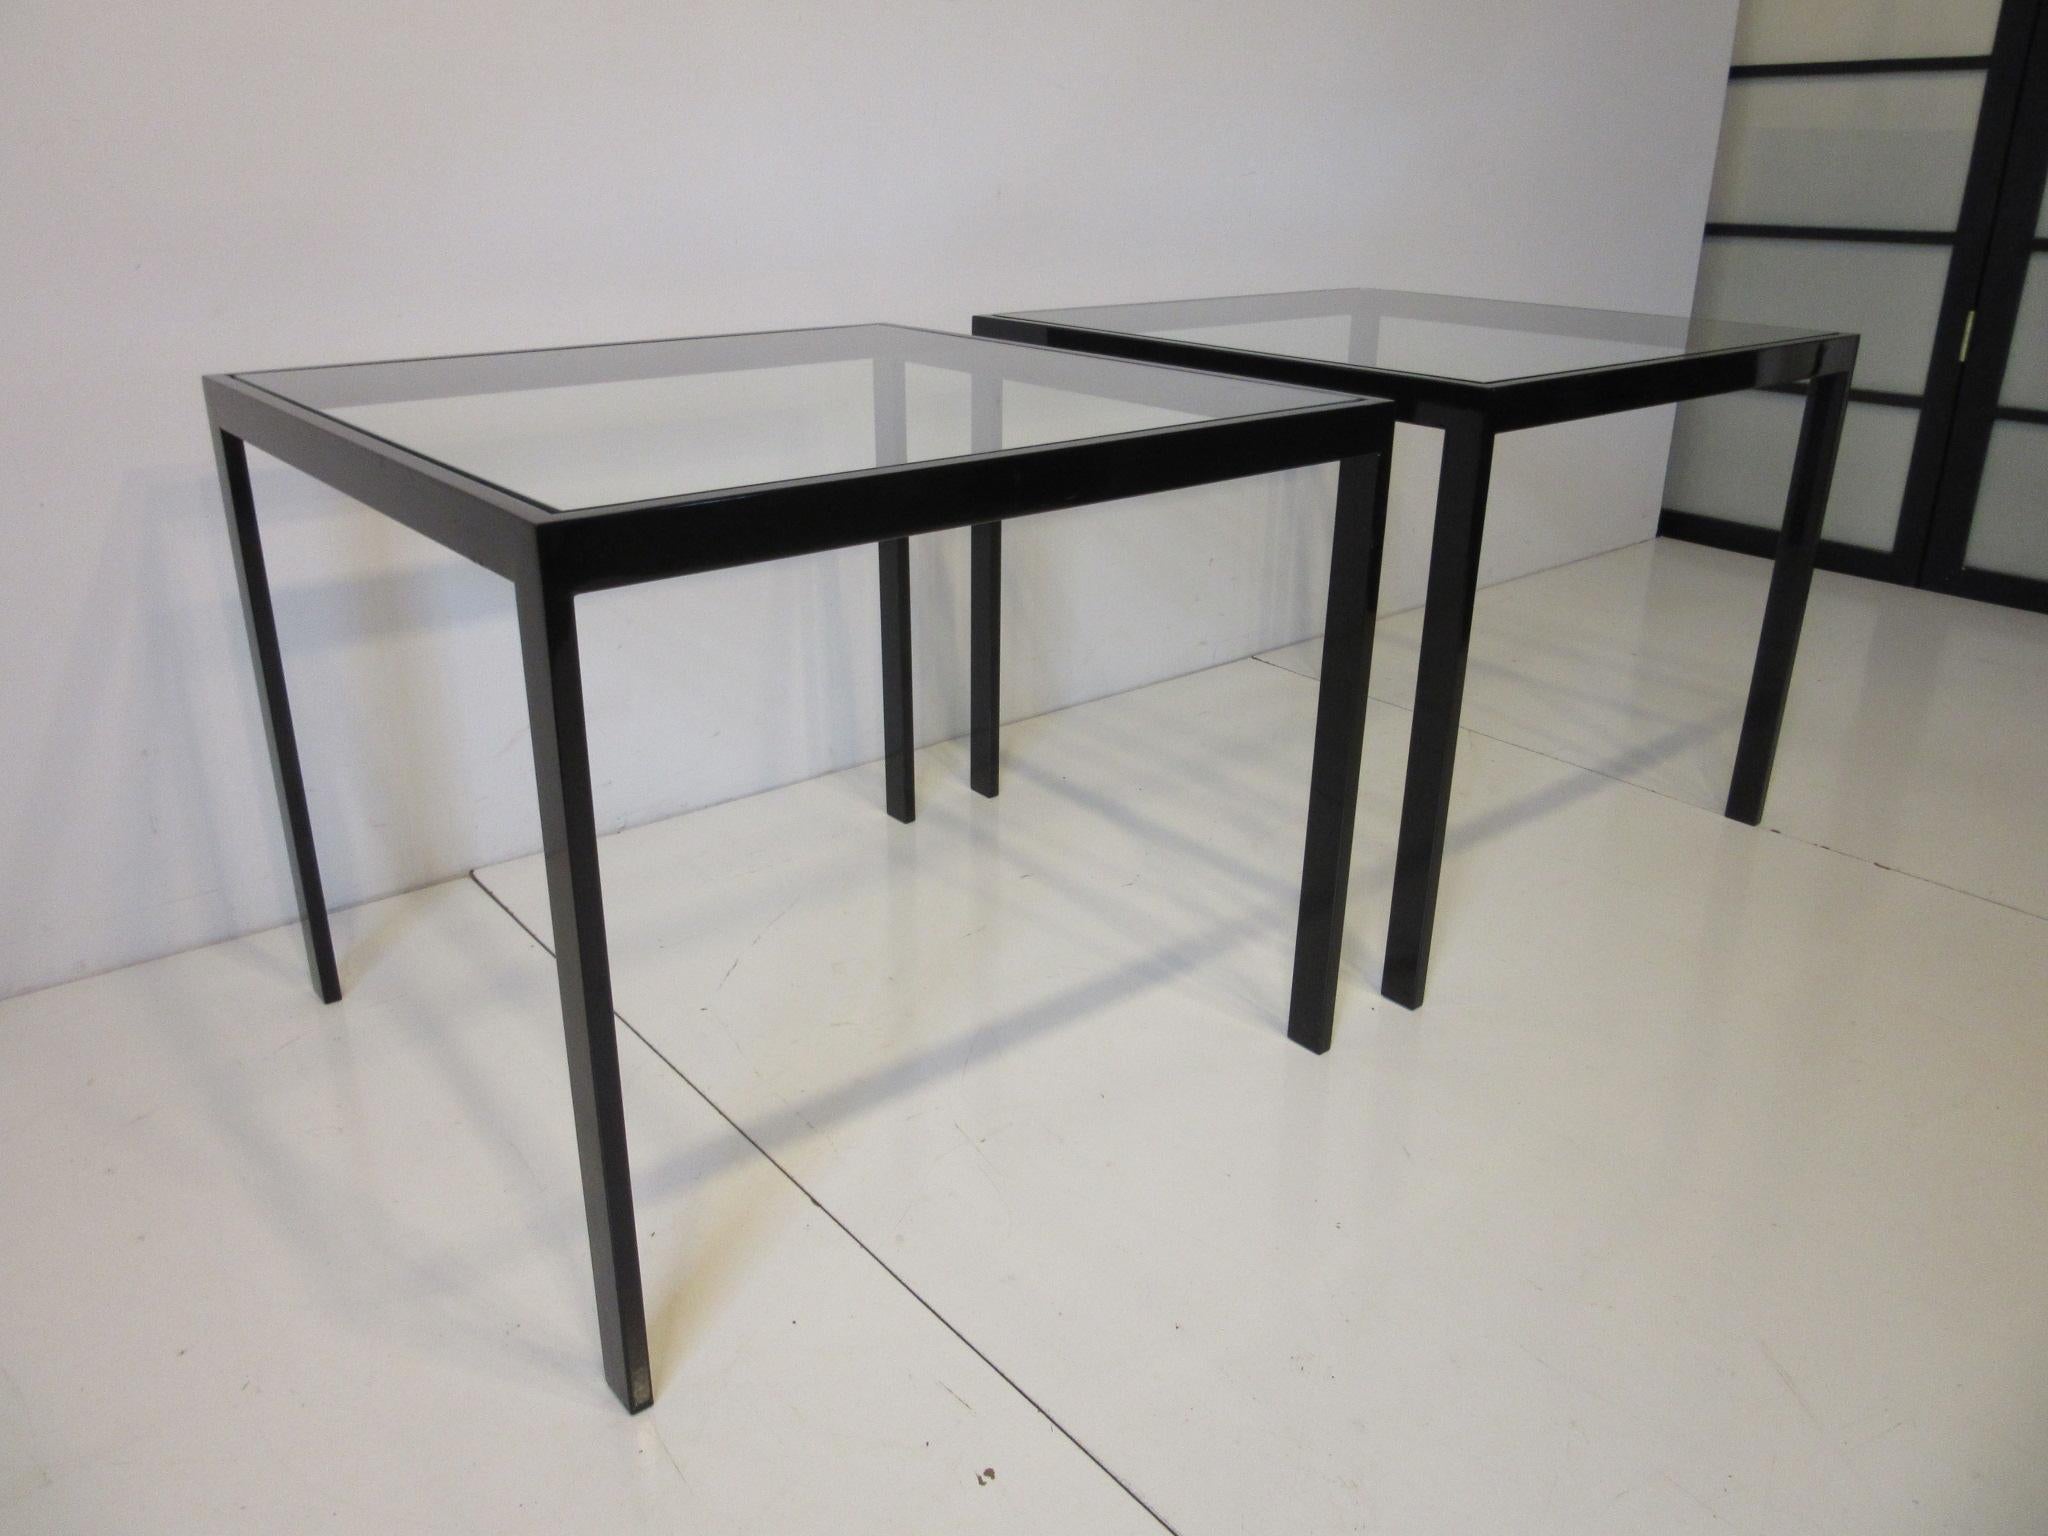 A pair of anodized black metal framed side tables with glass inserted tops, retains the manufactures serial numbered label for these hard to find pieces. Great for any interior with that period black Porsche styled finish found in the 1970s and